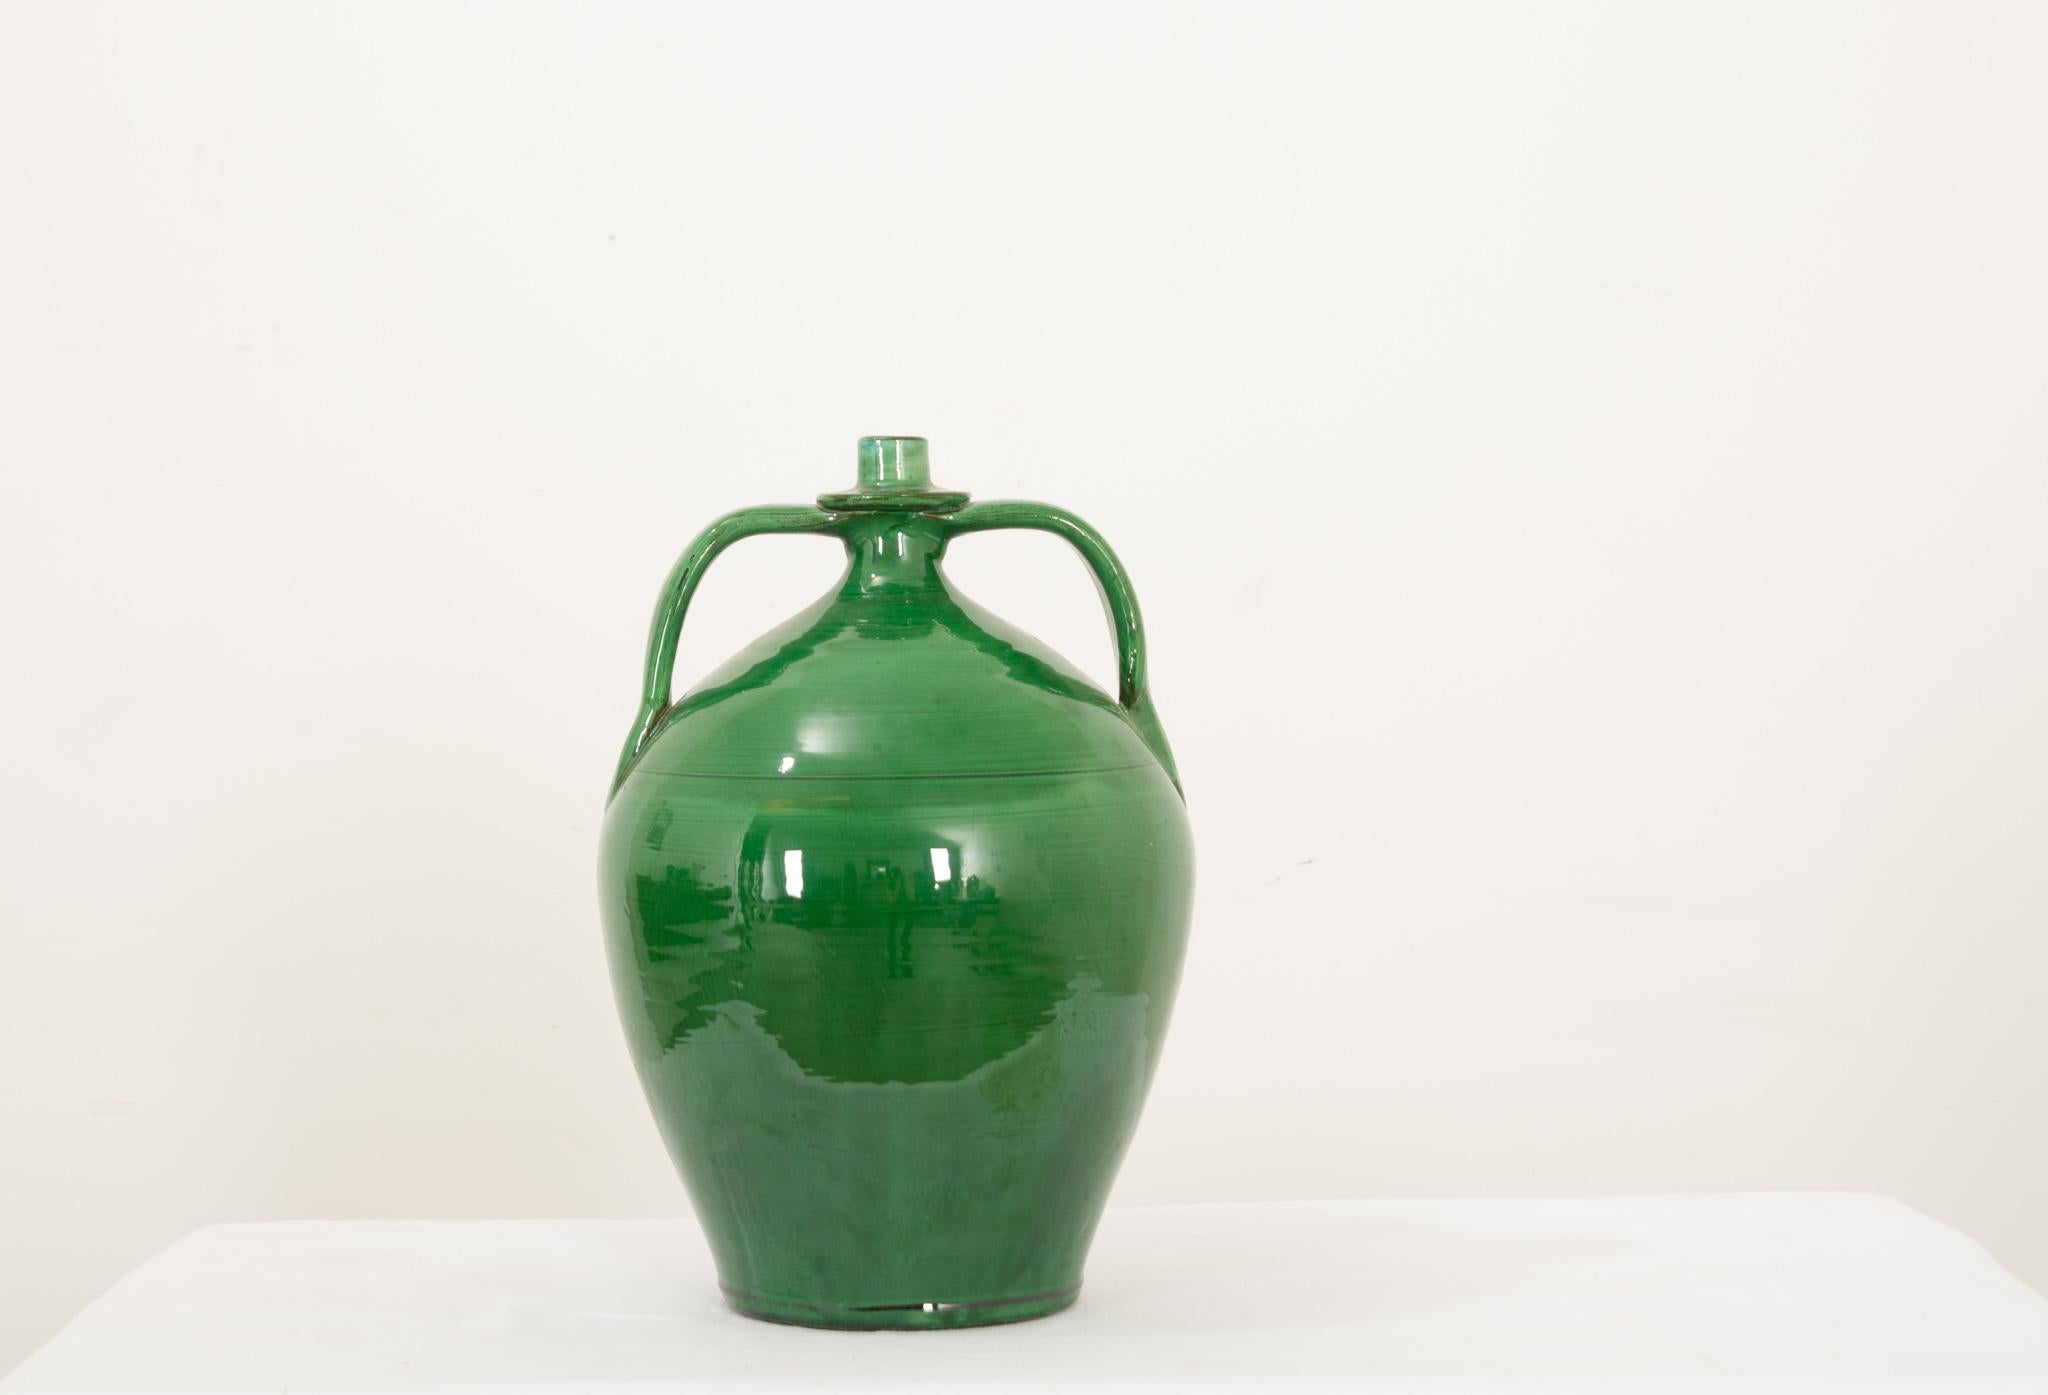 A fantastic mid-century modern, green glazed pottery jar, crafted in Italy by Ceramiche Nicola Fasano. One of the times most sought after ceramicist and one of his most sought after designs. The green glaze is in amazing condition and adds a